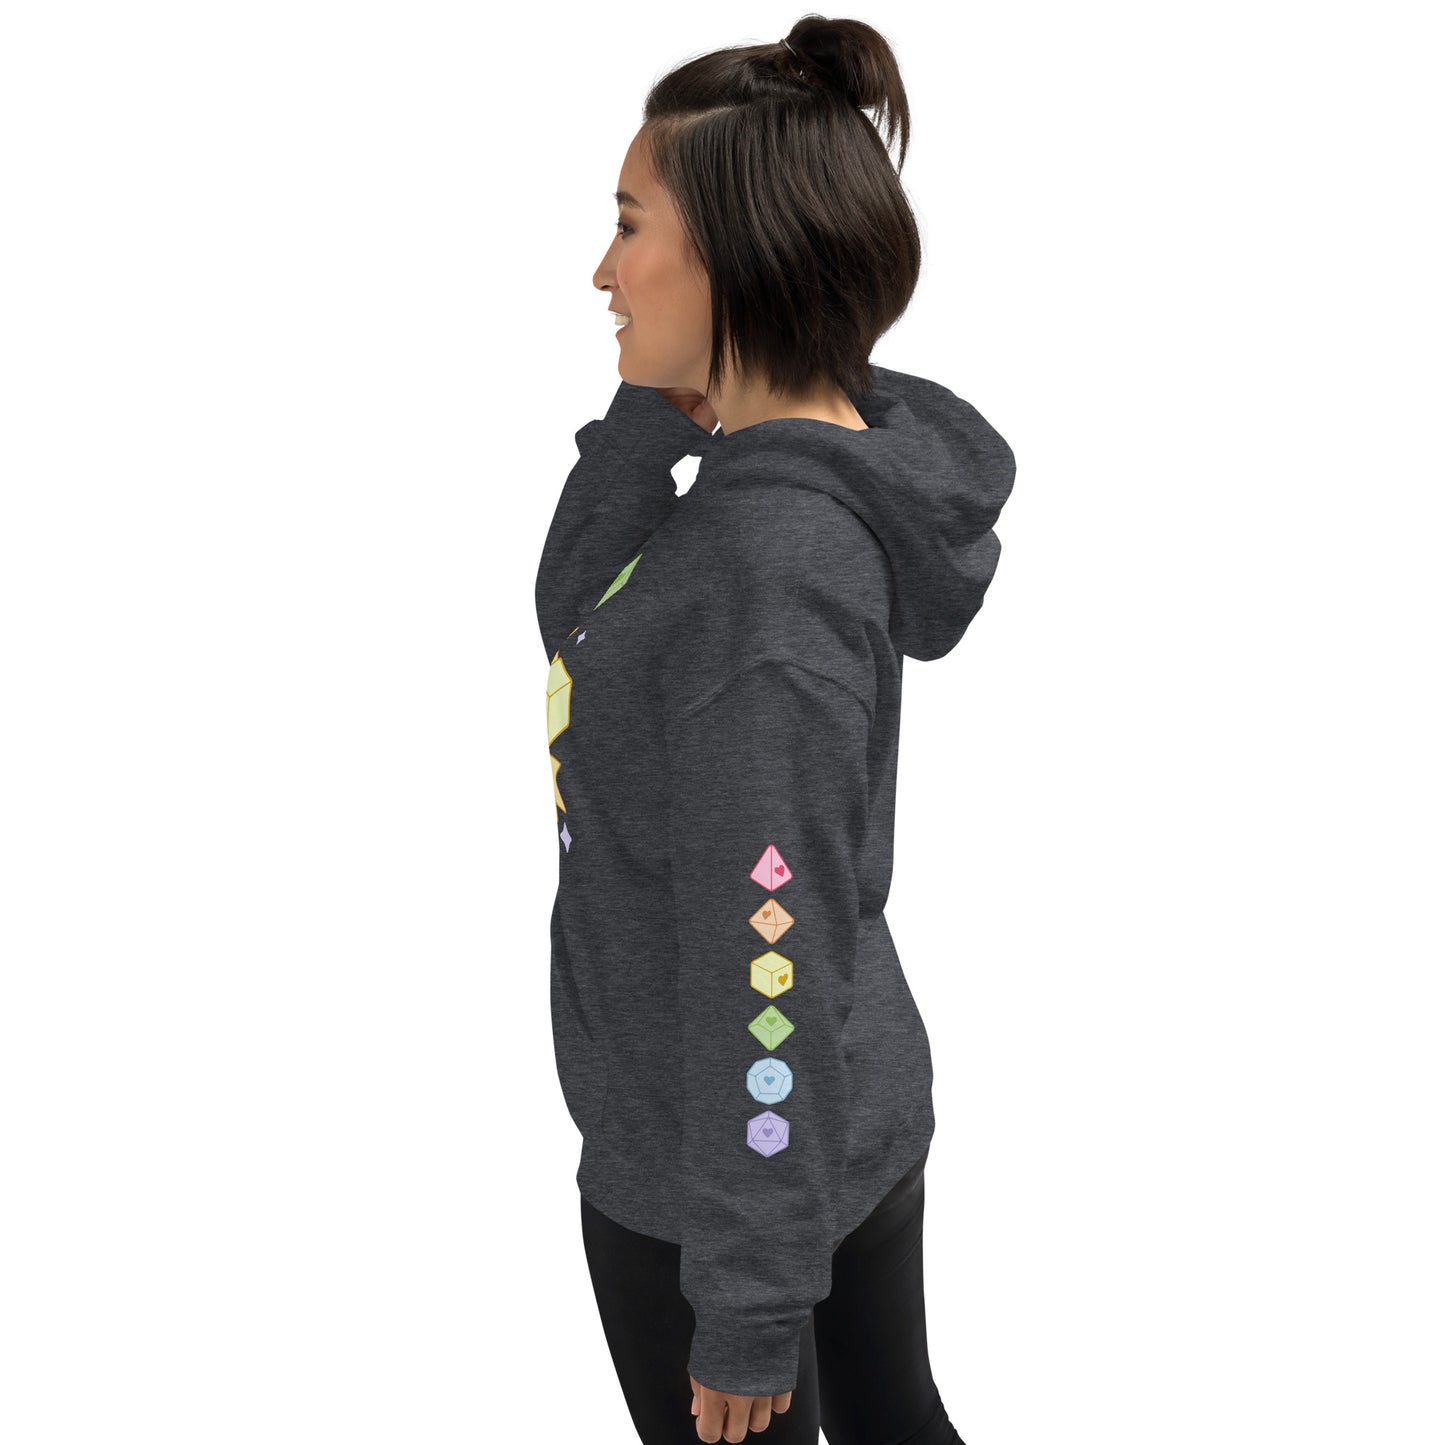 A woman wearing a hooded dark grey sweatshirt, facing to the left. On the sleeve of the sweatshirt is the image of six polyhedral dice in pastel rainbow colors.